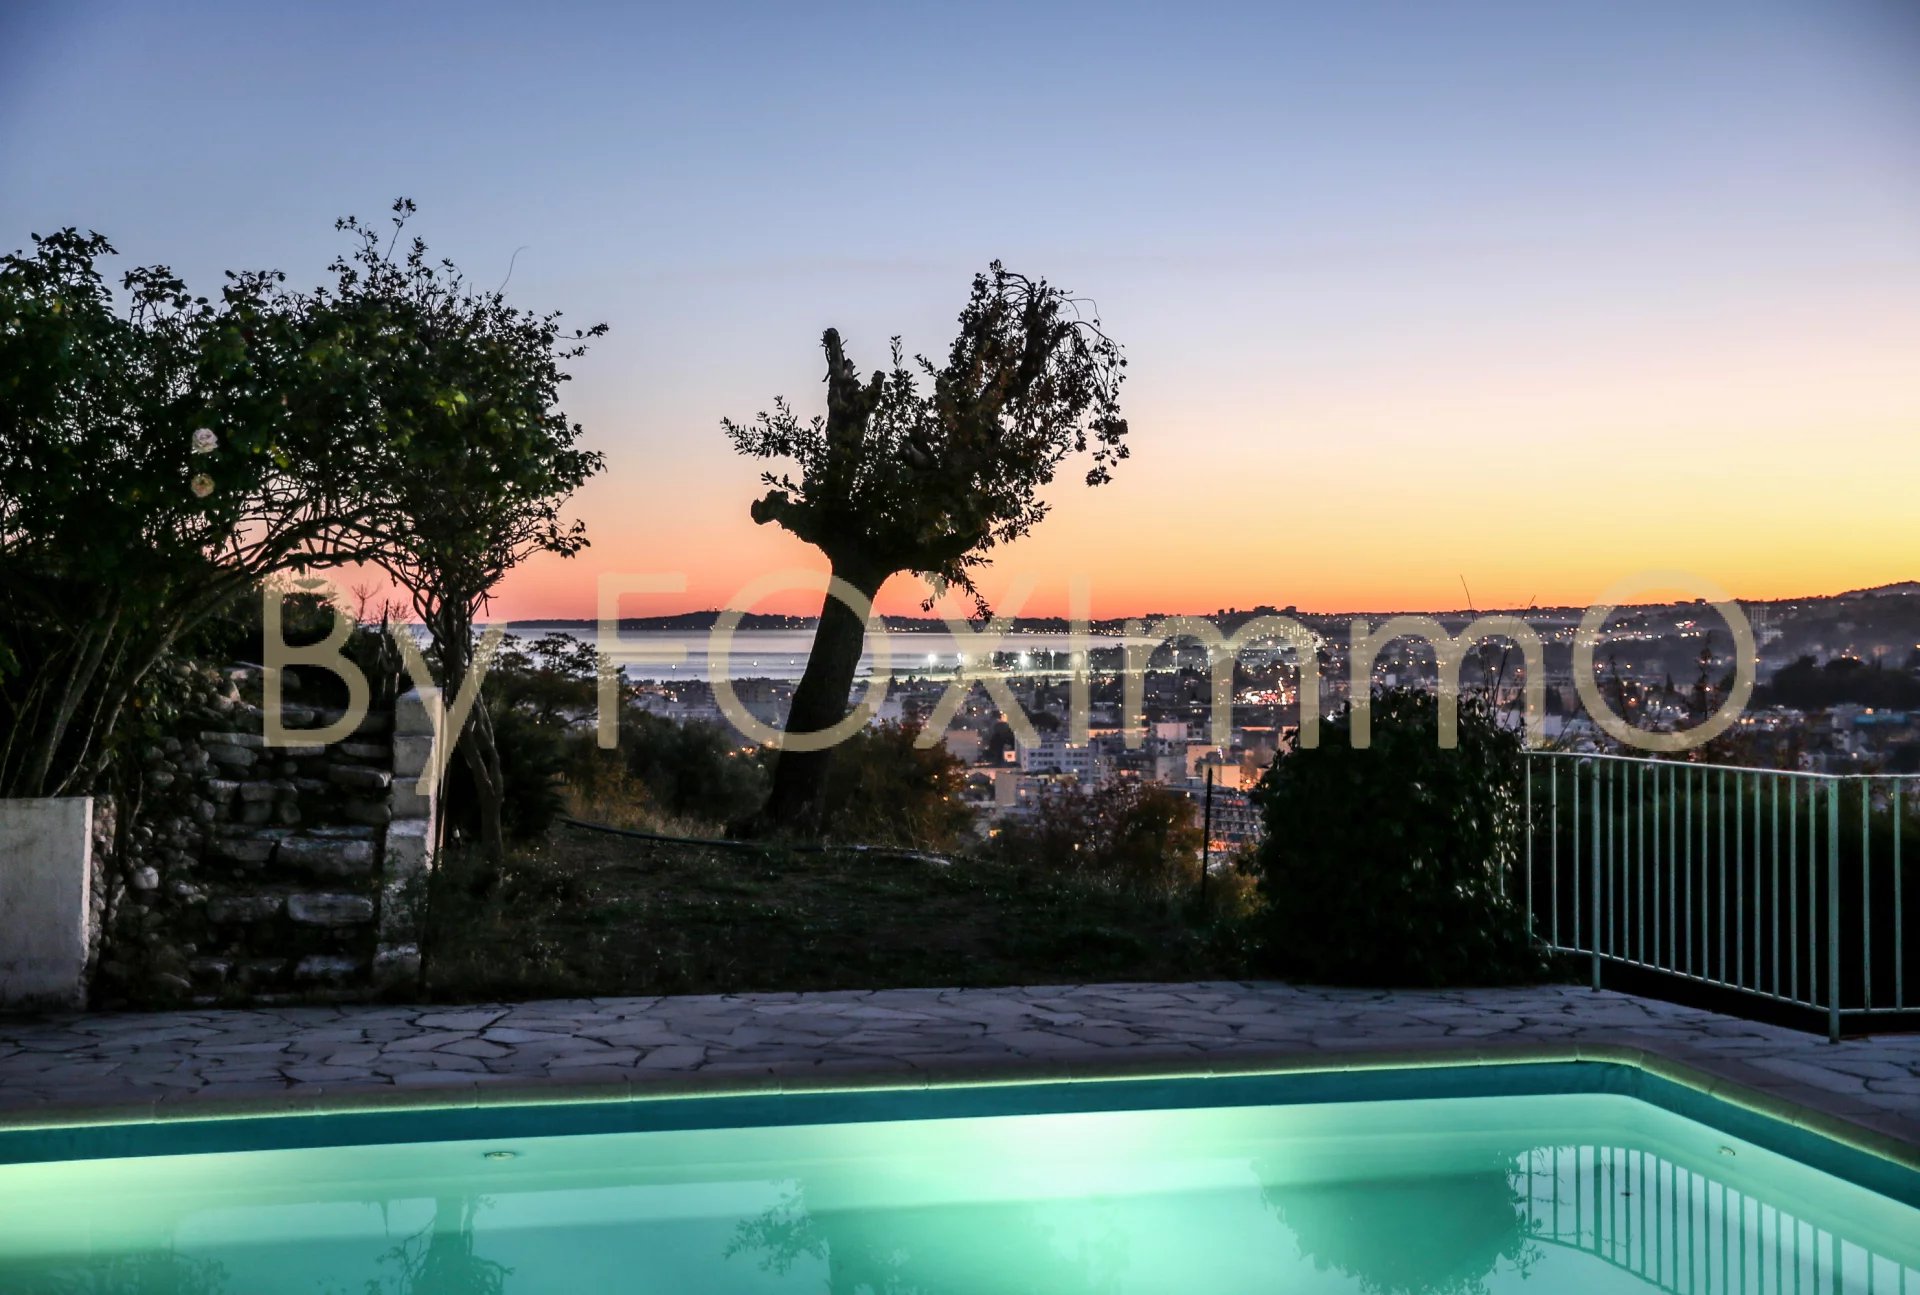 Luxury villa with swimming pool and panoramic sea view. French Riviera - Cagnes sur Mer